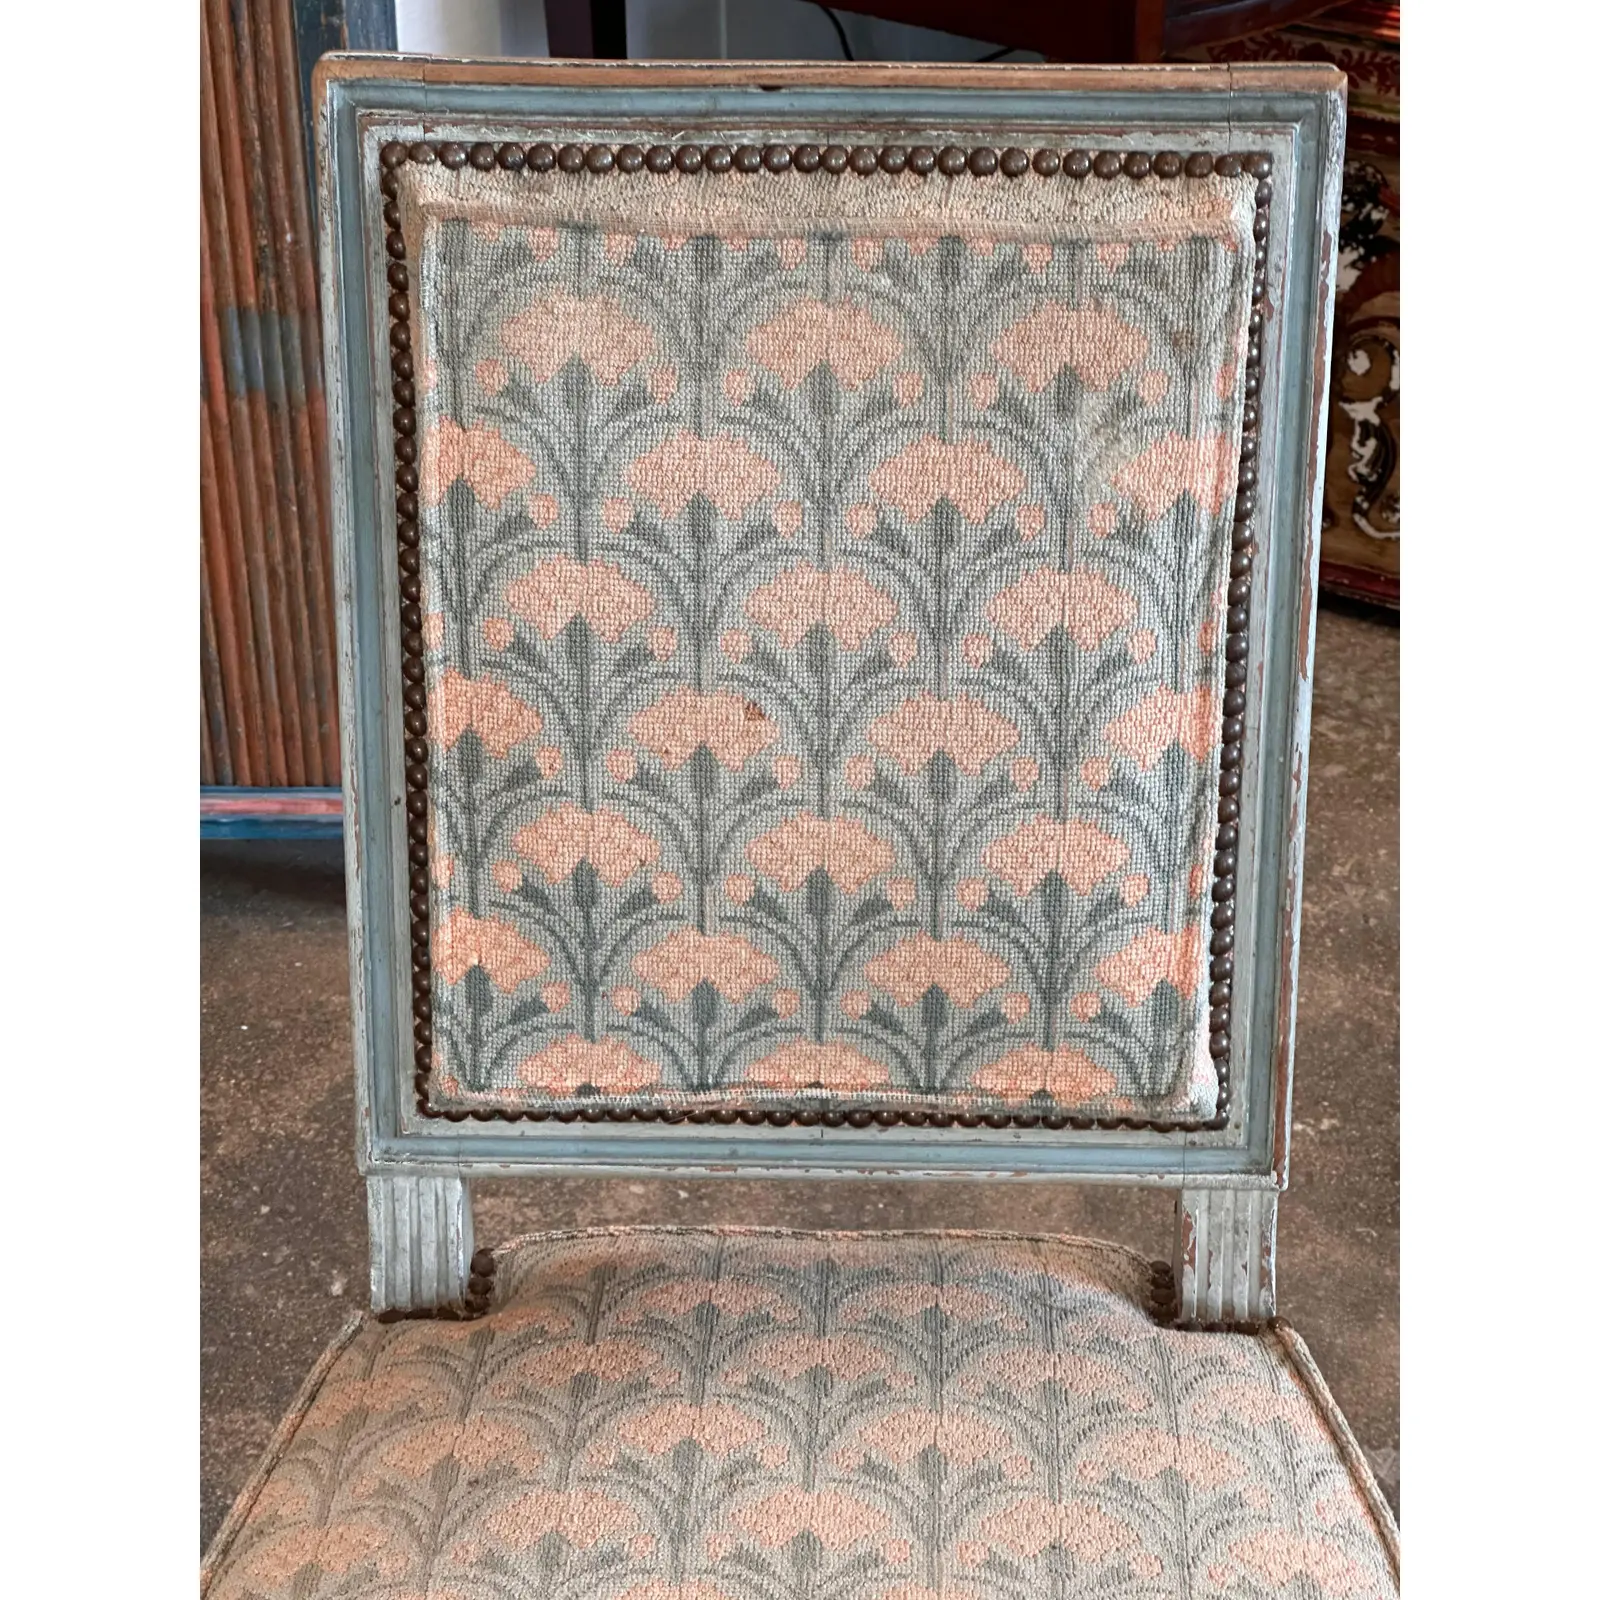 Late 19th Century Pair of Louis XVI Style Painted Arm Chairs - Kenny Ball  Antiques